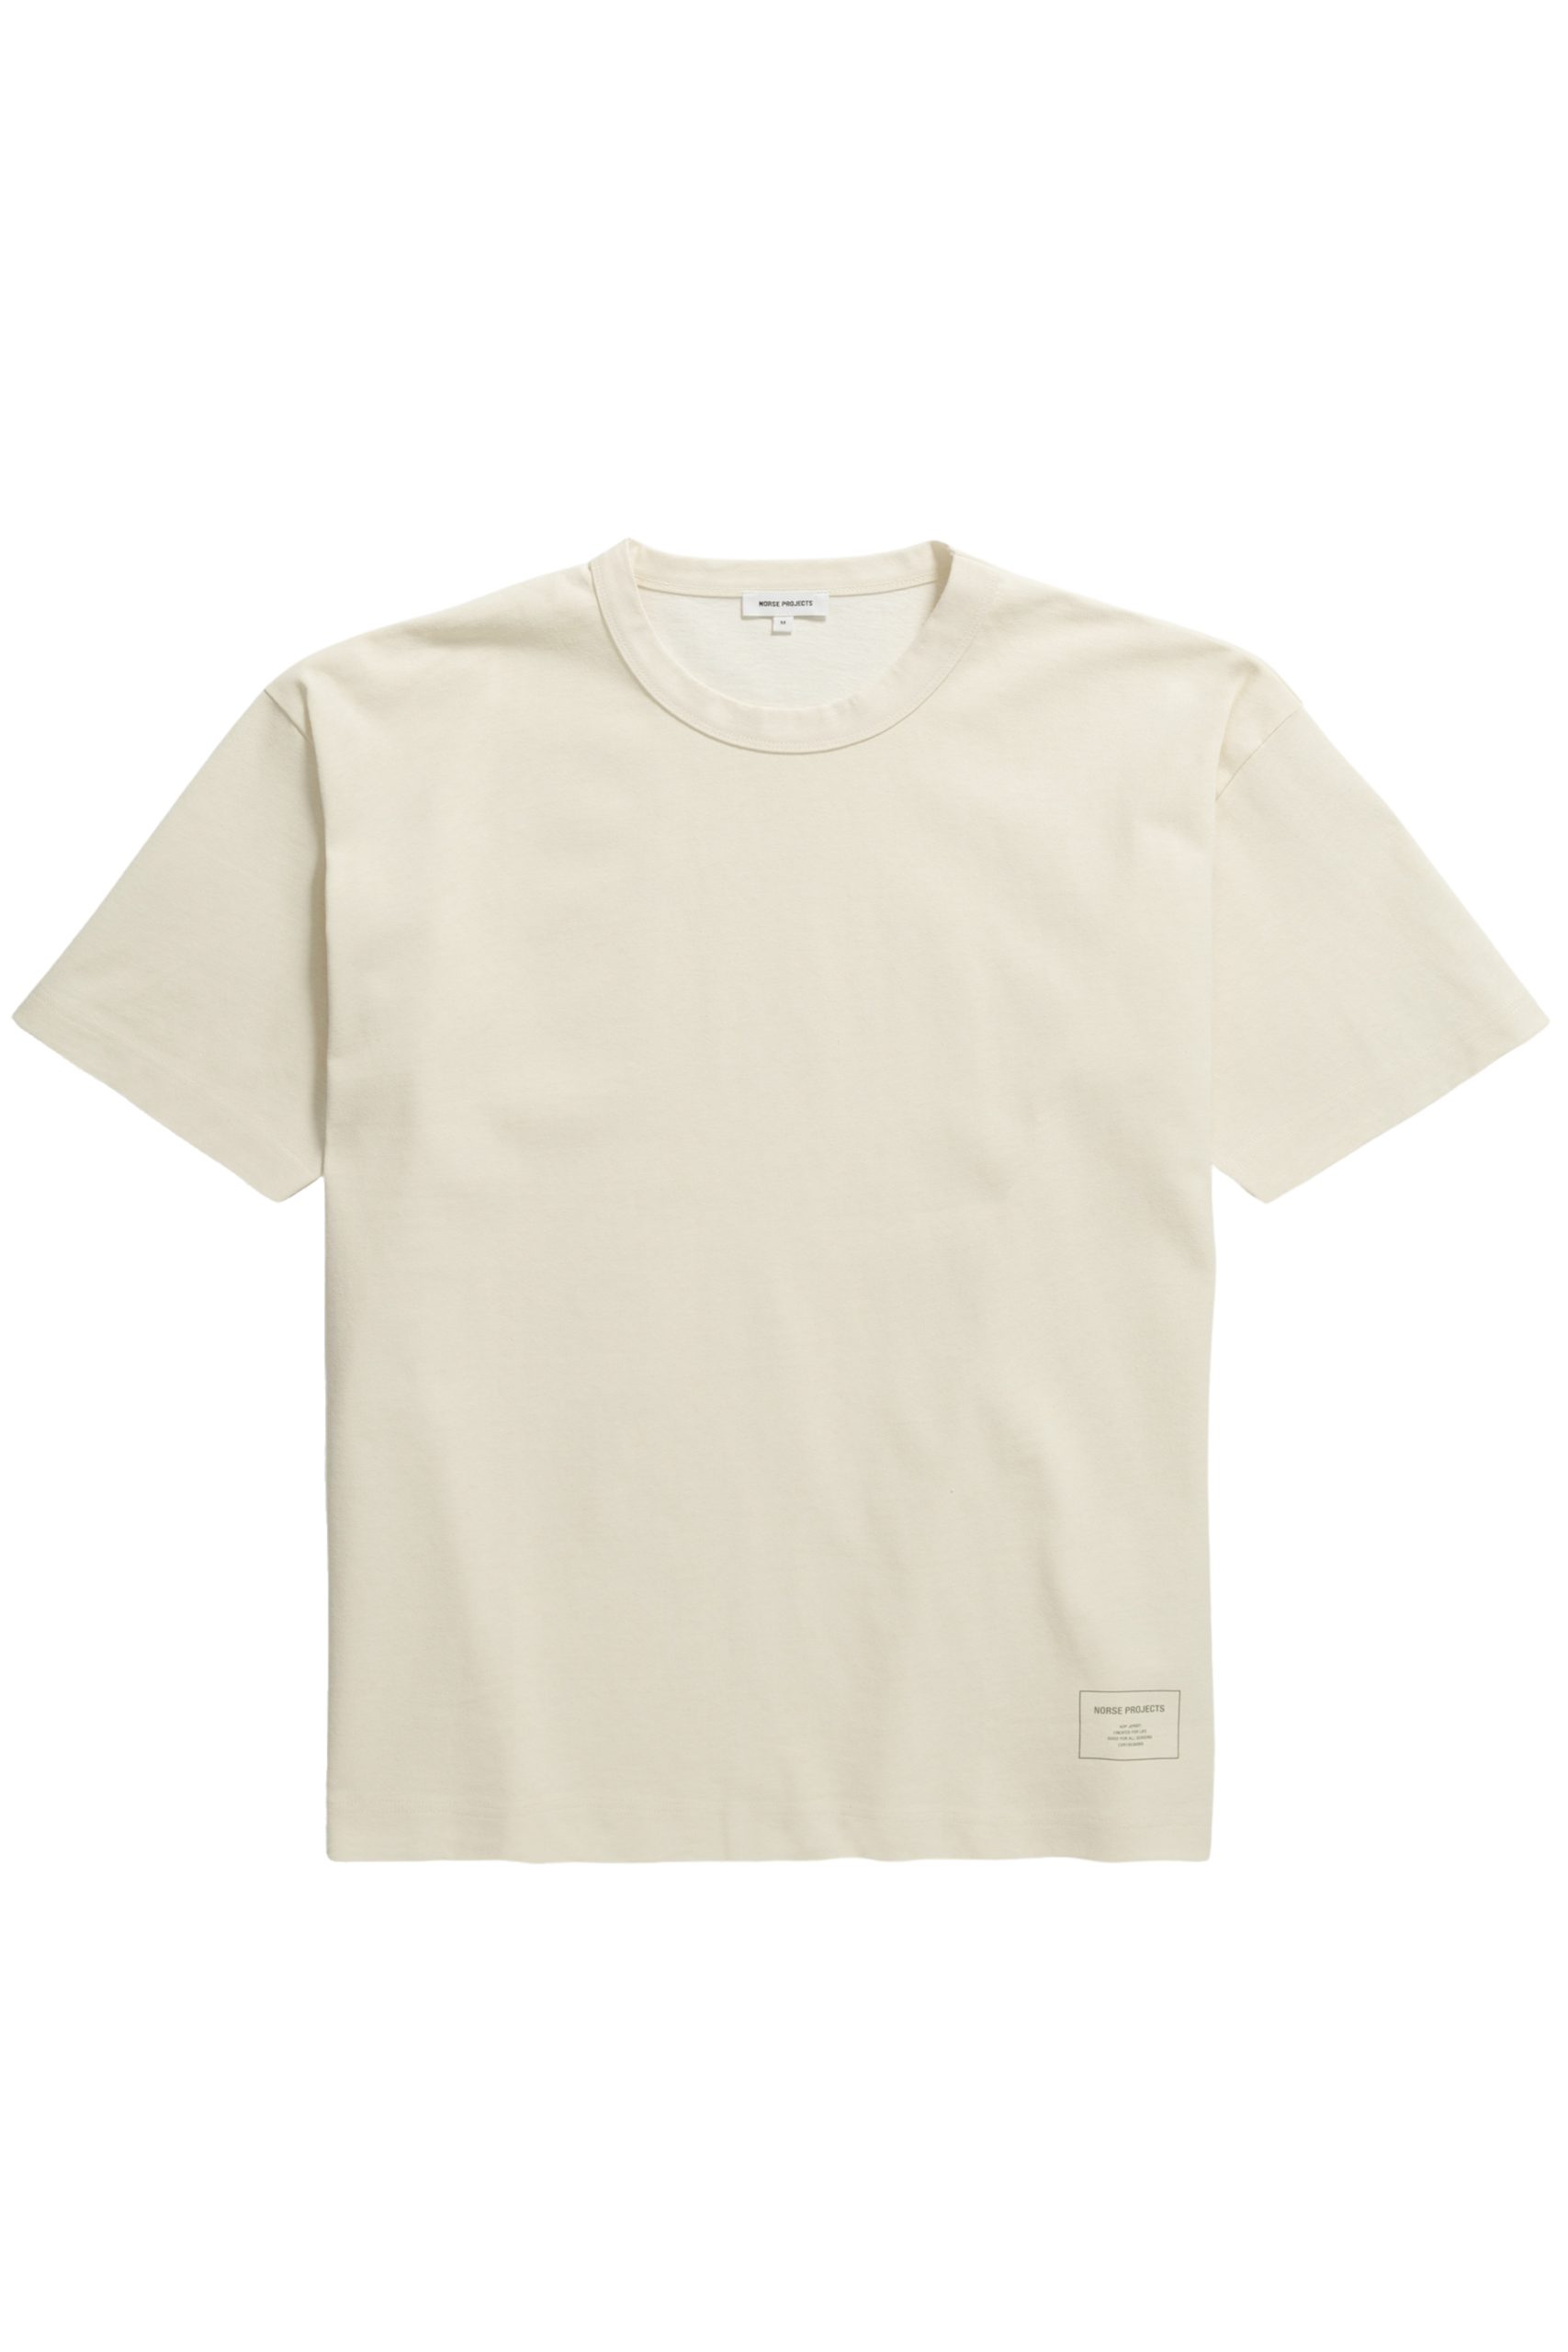 NORSE PROJECTS SIMON Loose printed tee shirt White